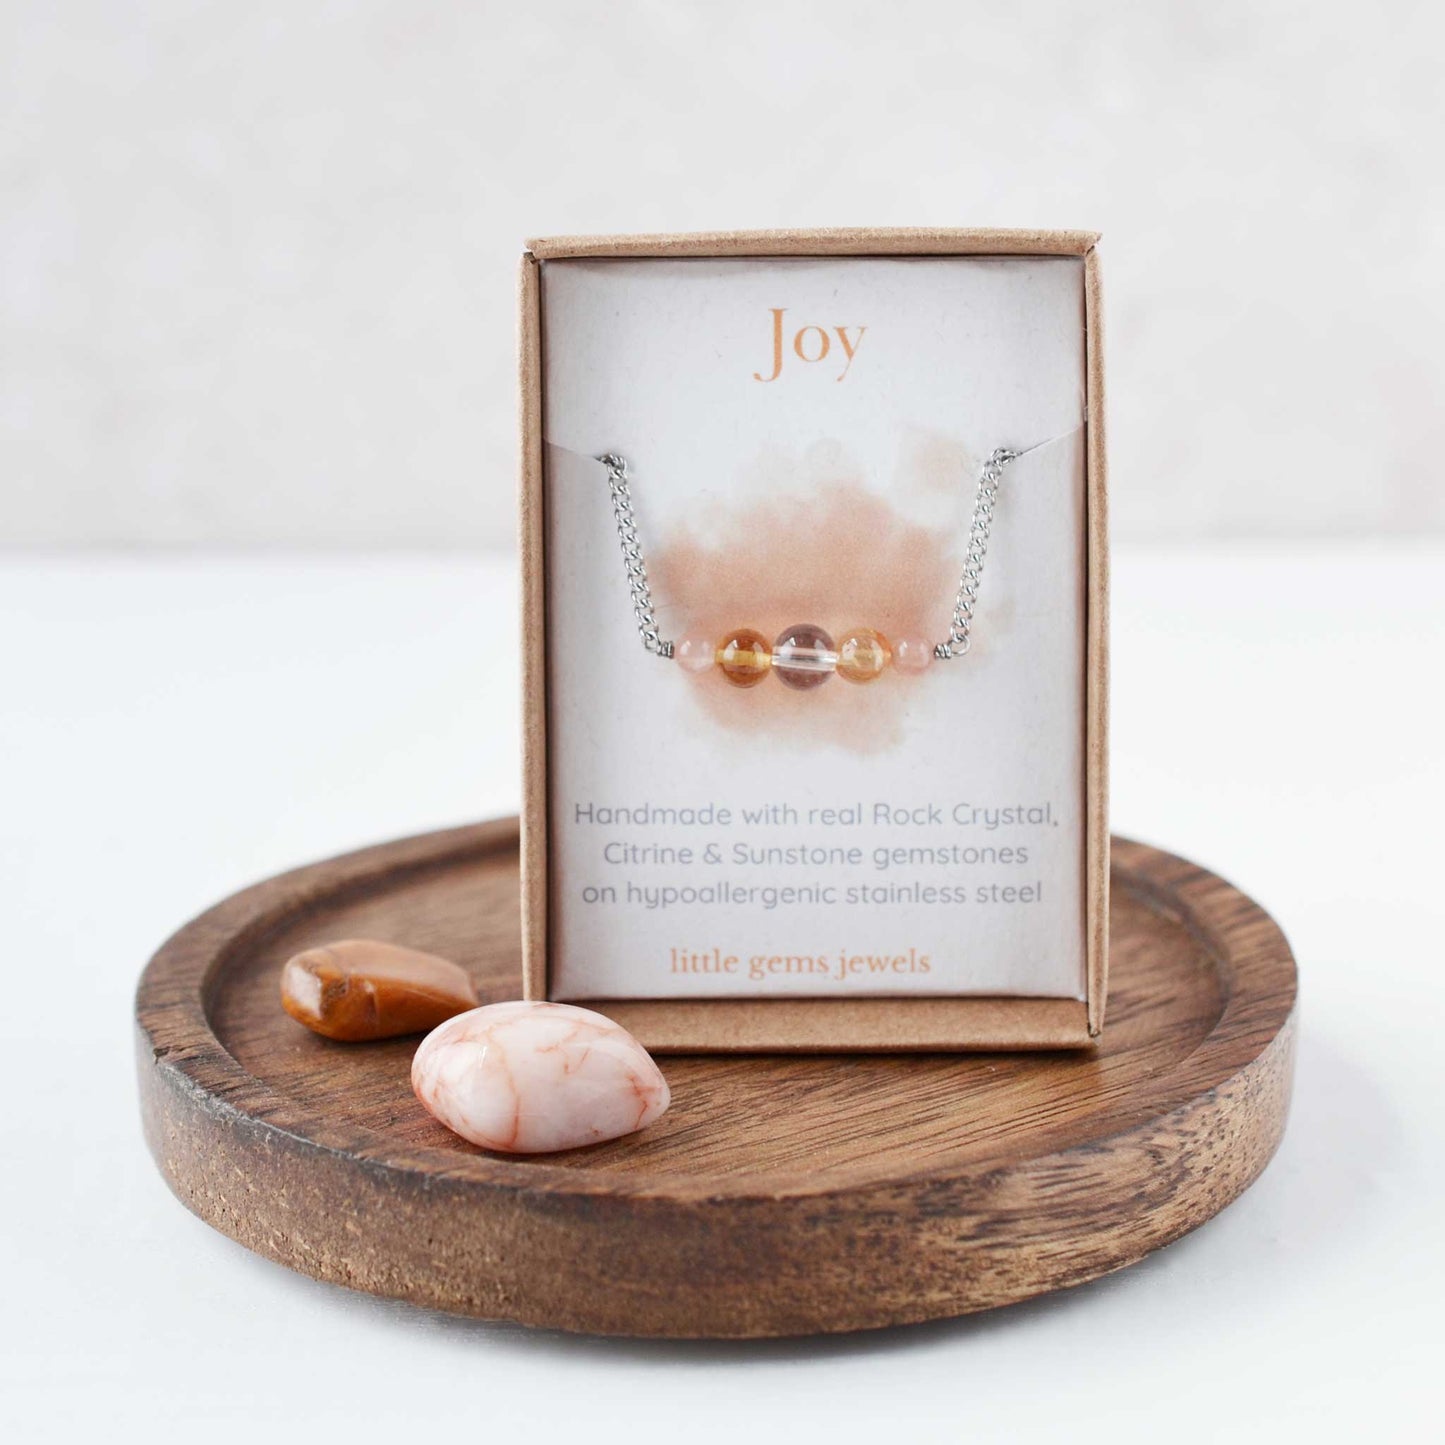 Gemstones for Joy necklace in eco friendly gift box